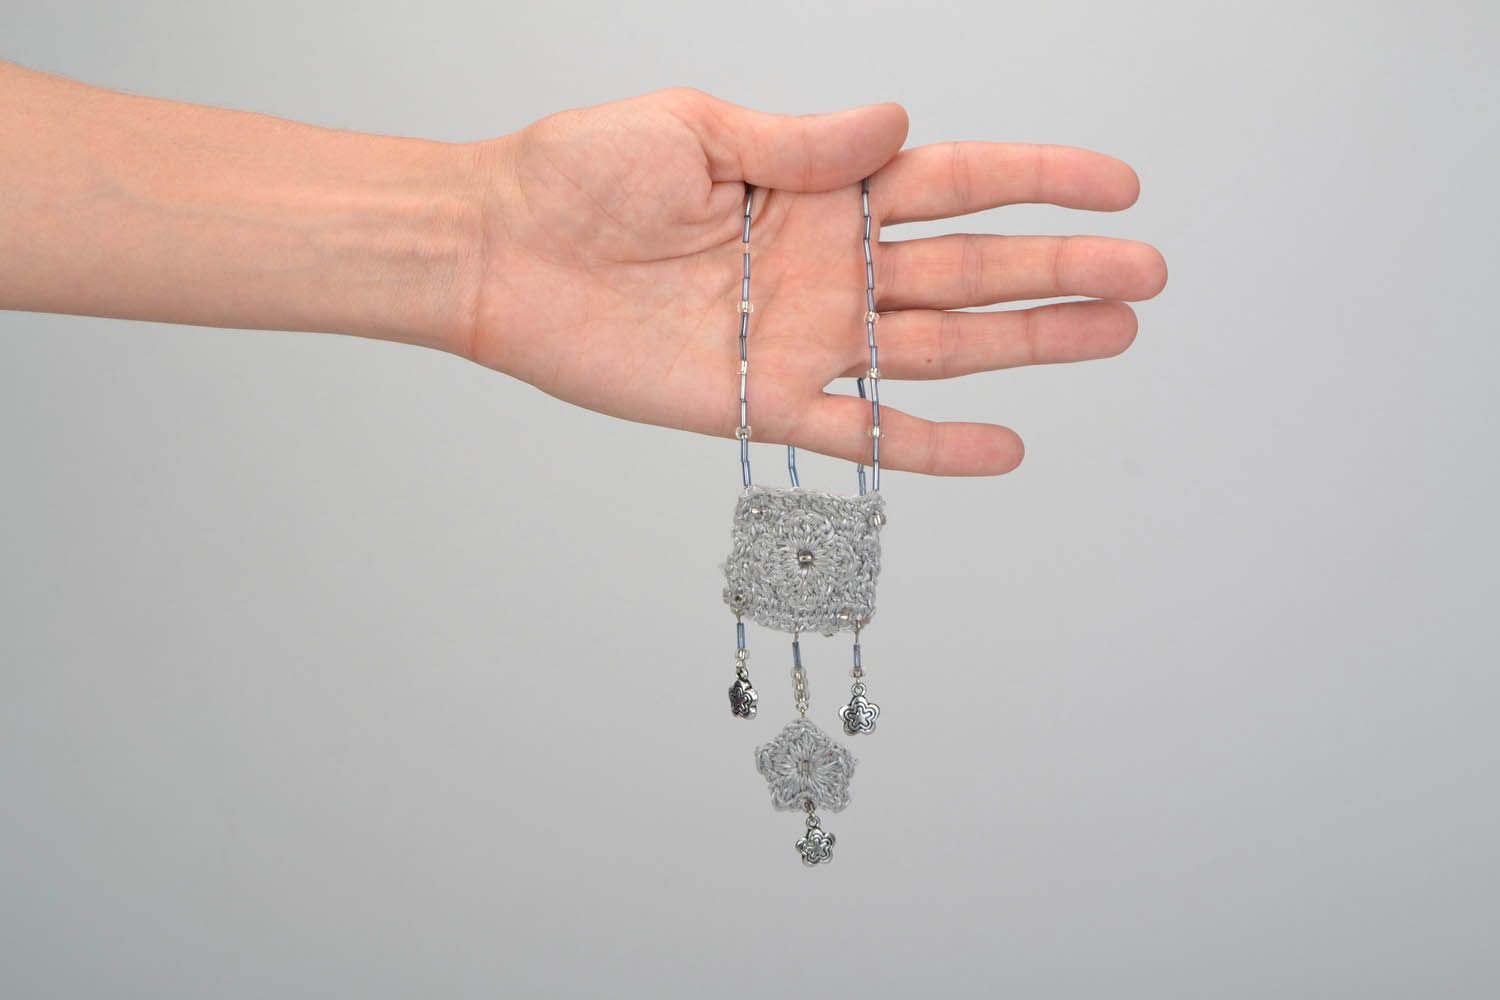 Crocheted pendant Shades of grey color photo 2